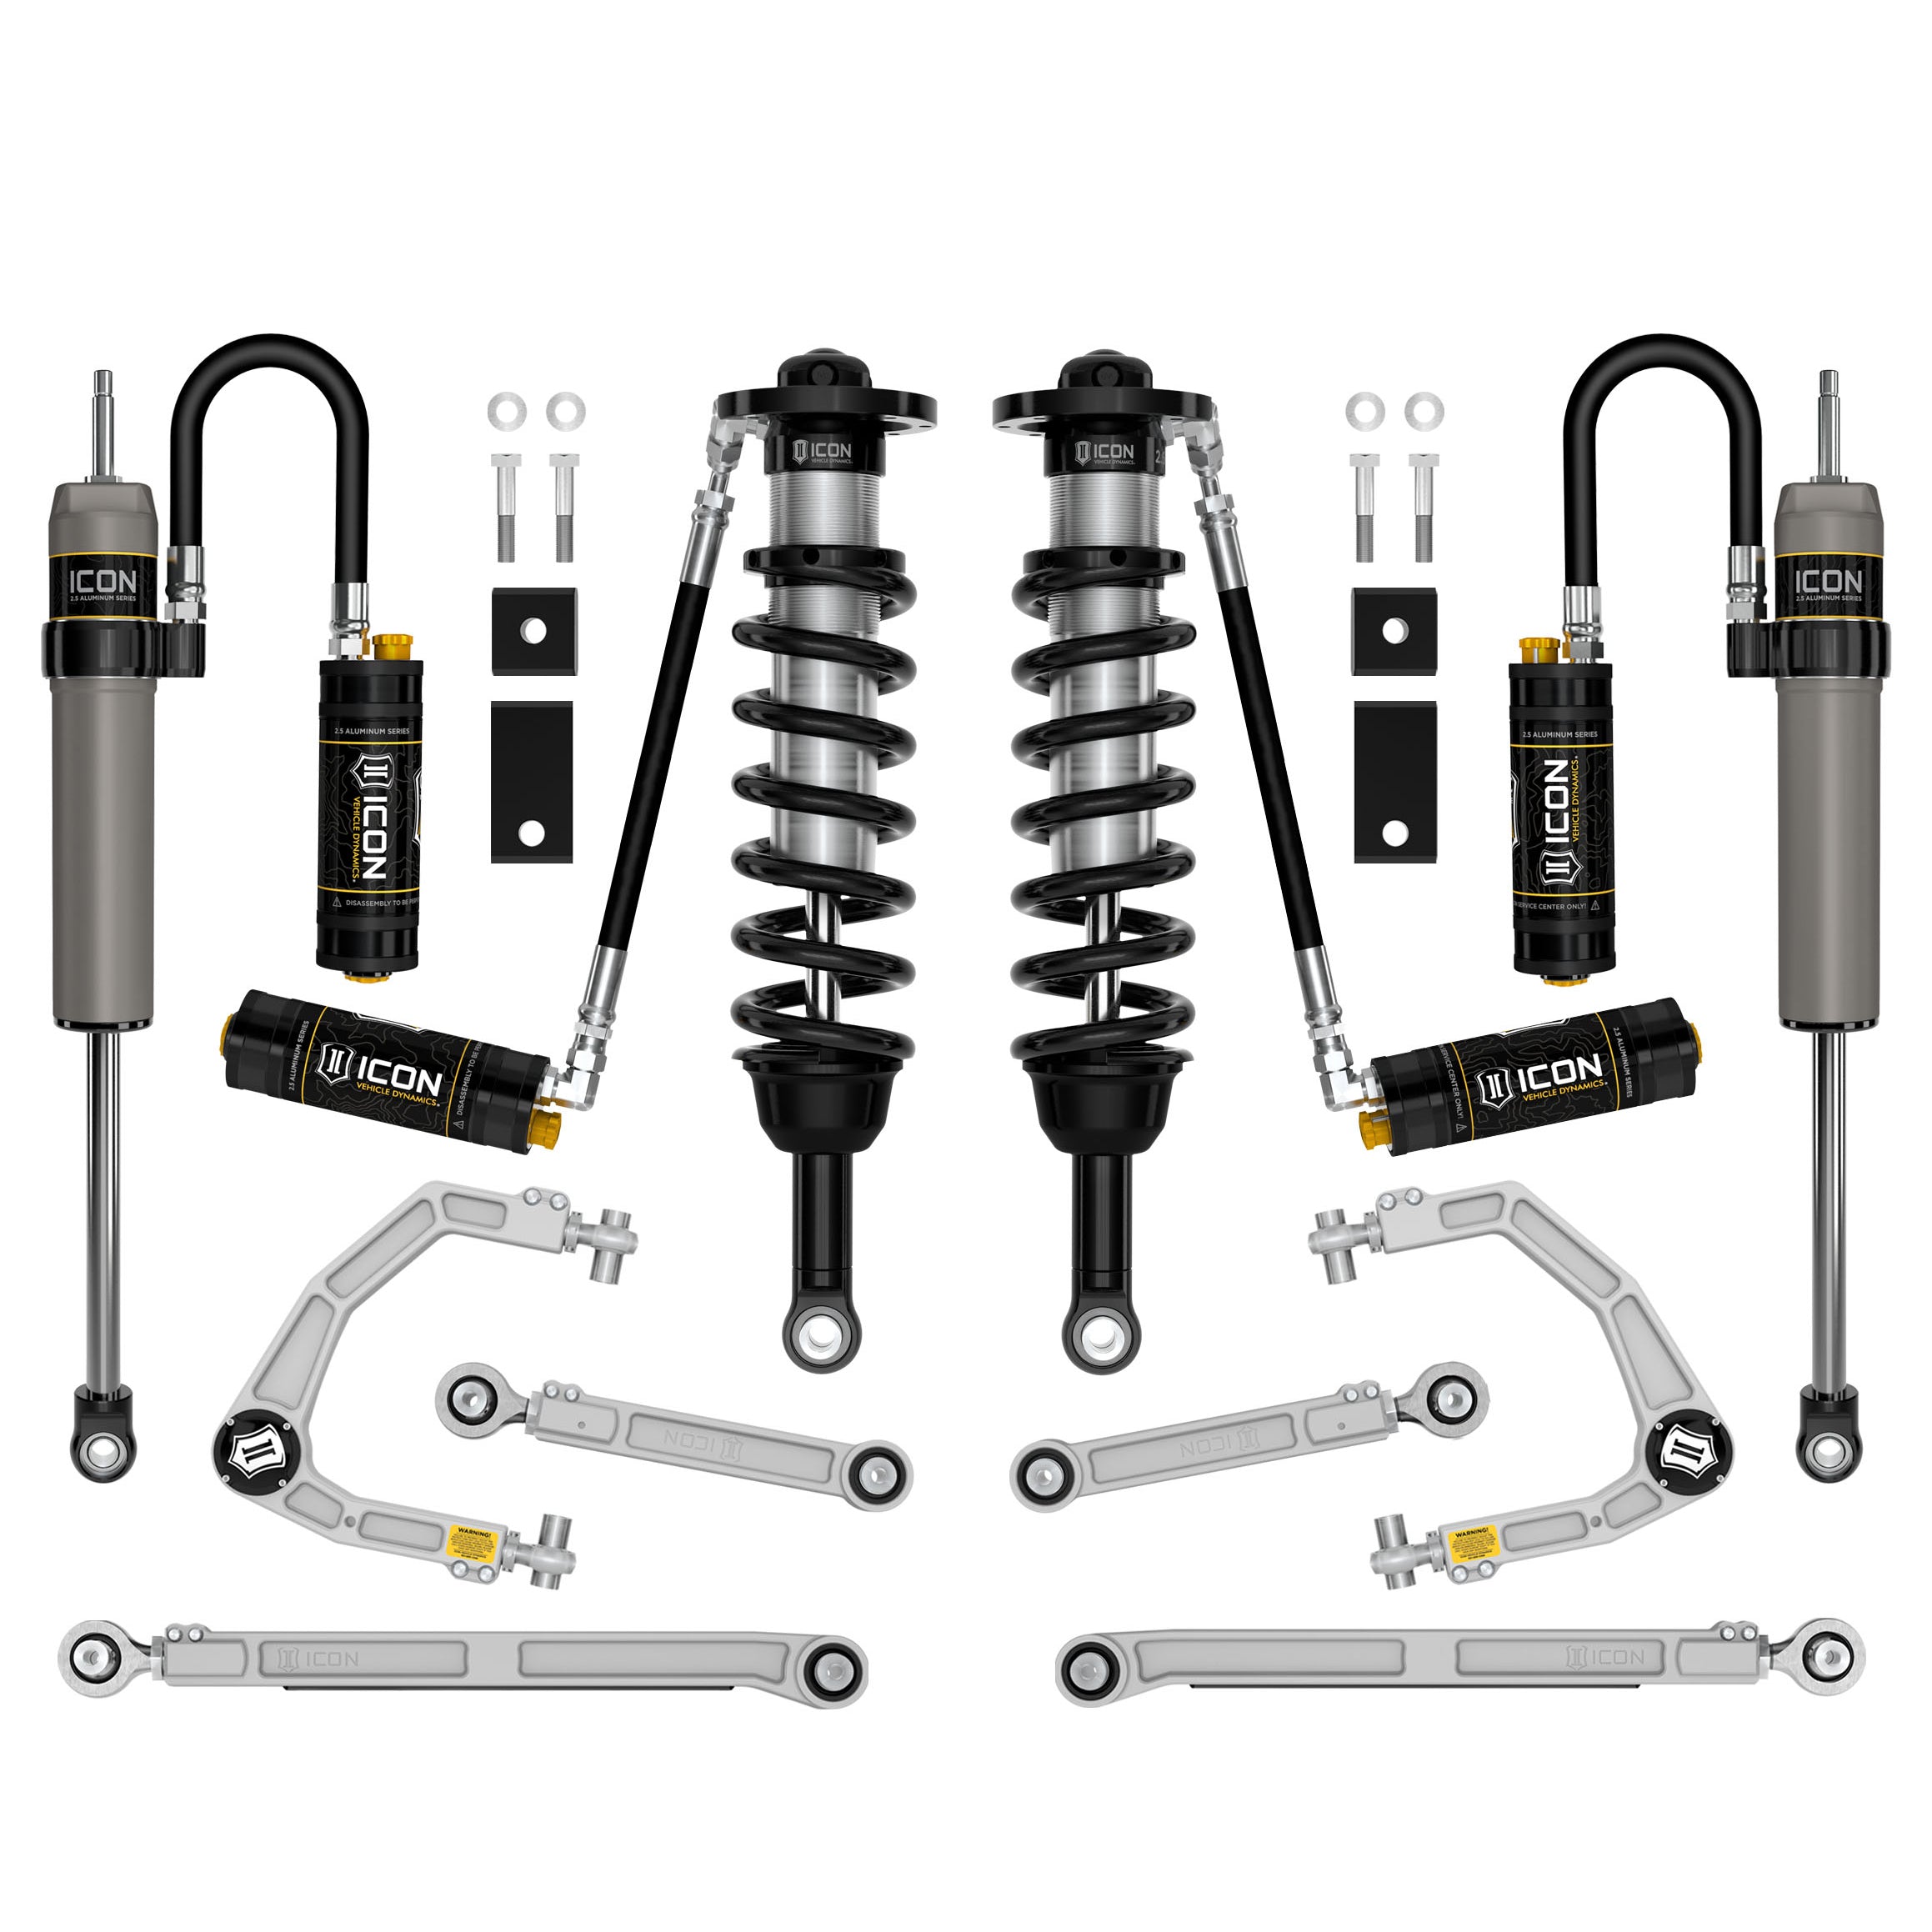 22-23 Toyota Tundra Icon Stage 10 Billet Suspension System parts